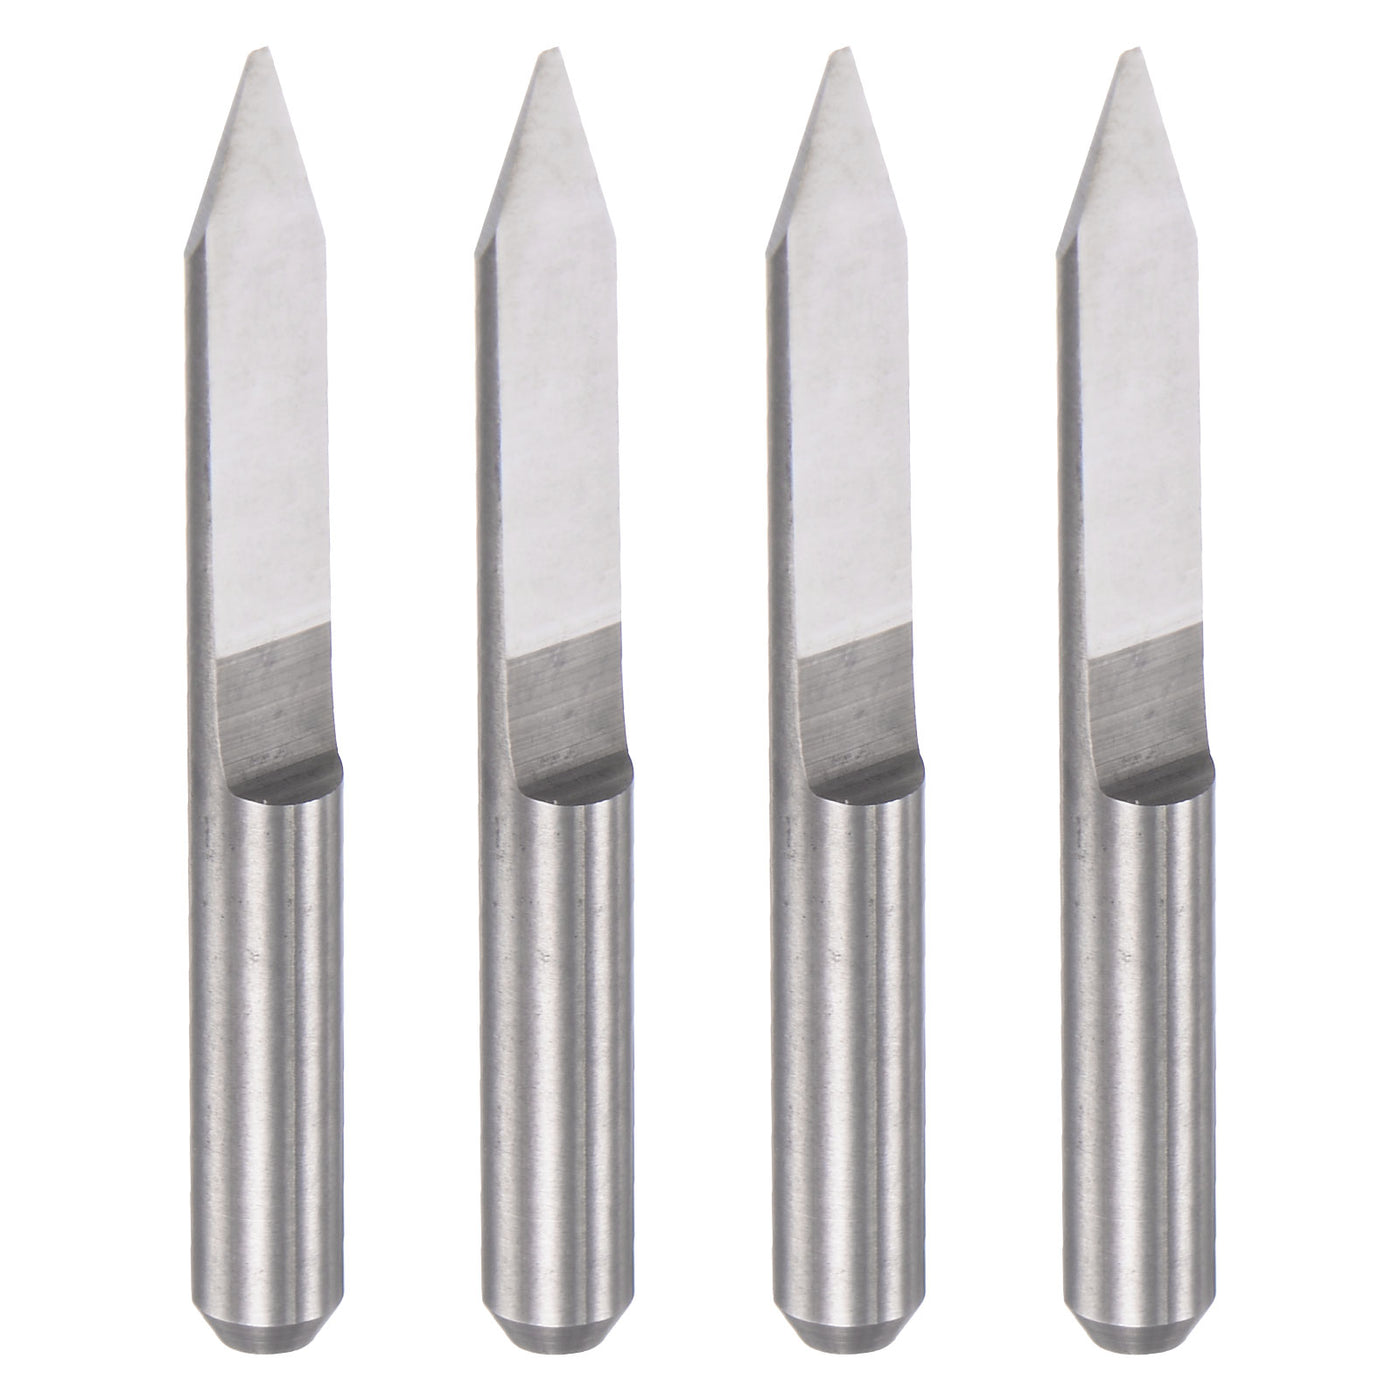 uxcell Uxcell 1/8" Shank 0.3mm Tip 40 Degree Solid Carbide Wood Engraving CNC Router Bit 4pcs